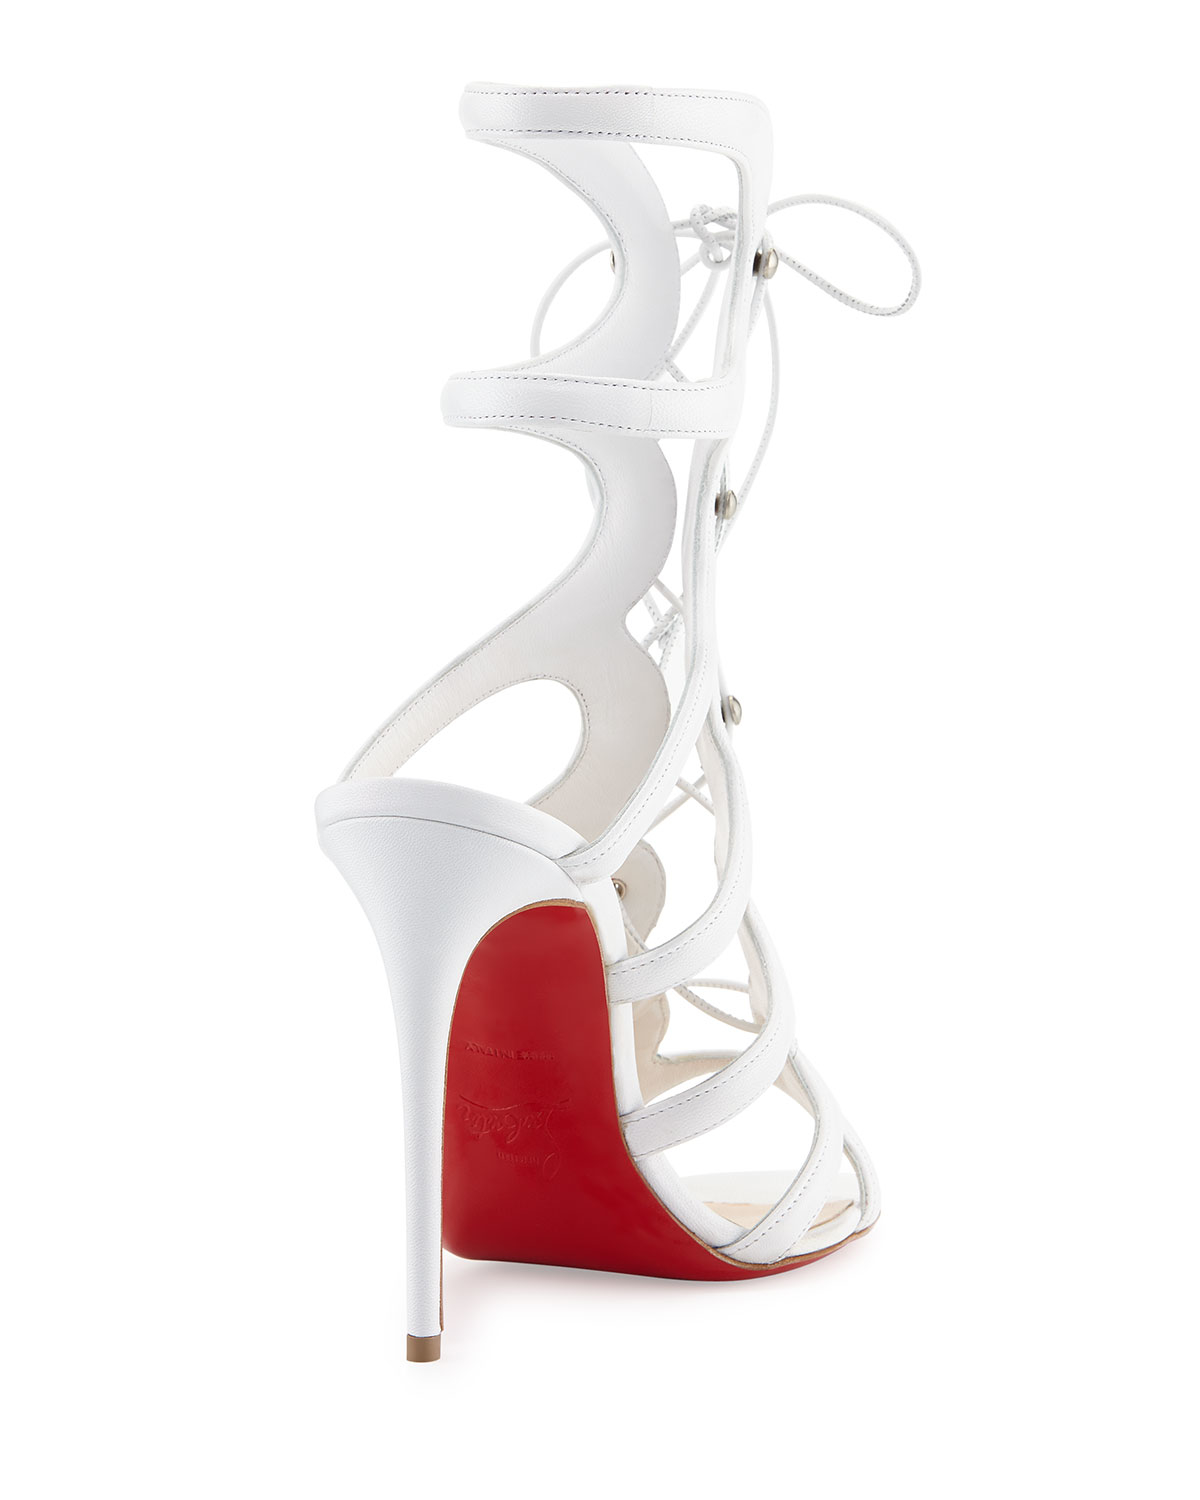 Christian louboutin Amazoula Lace-up Red Sole Sandal in White | Lyst